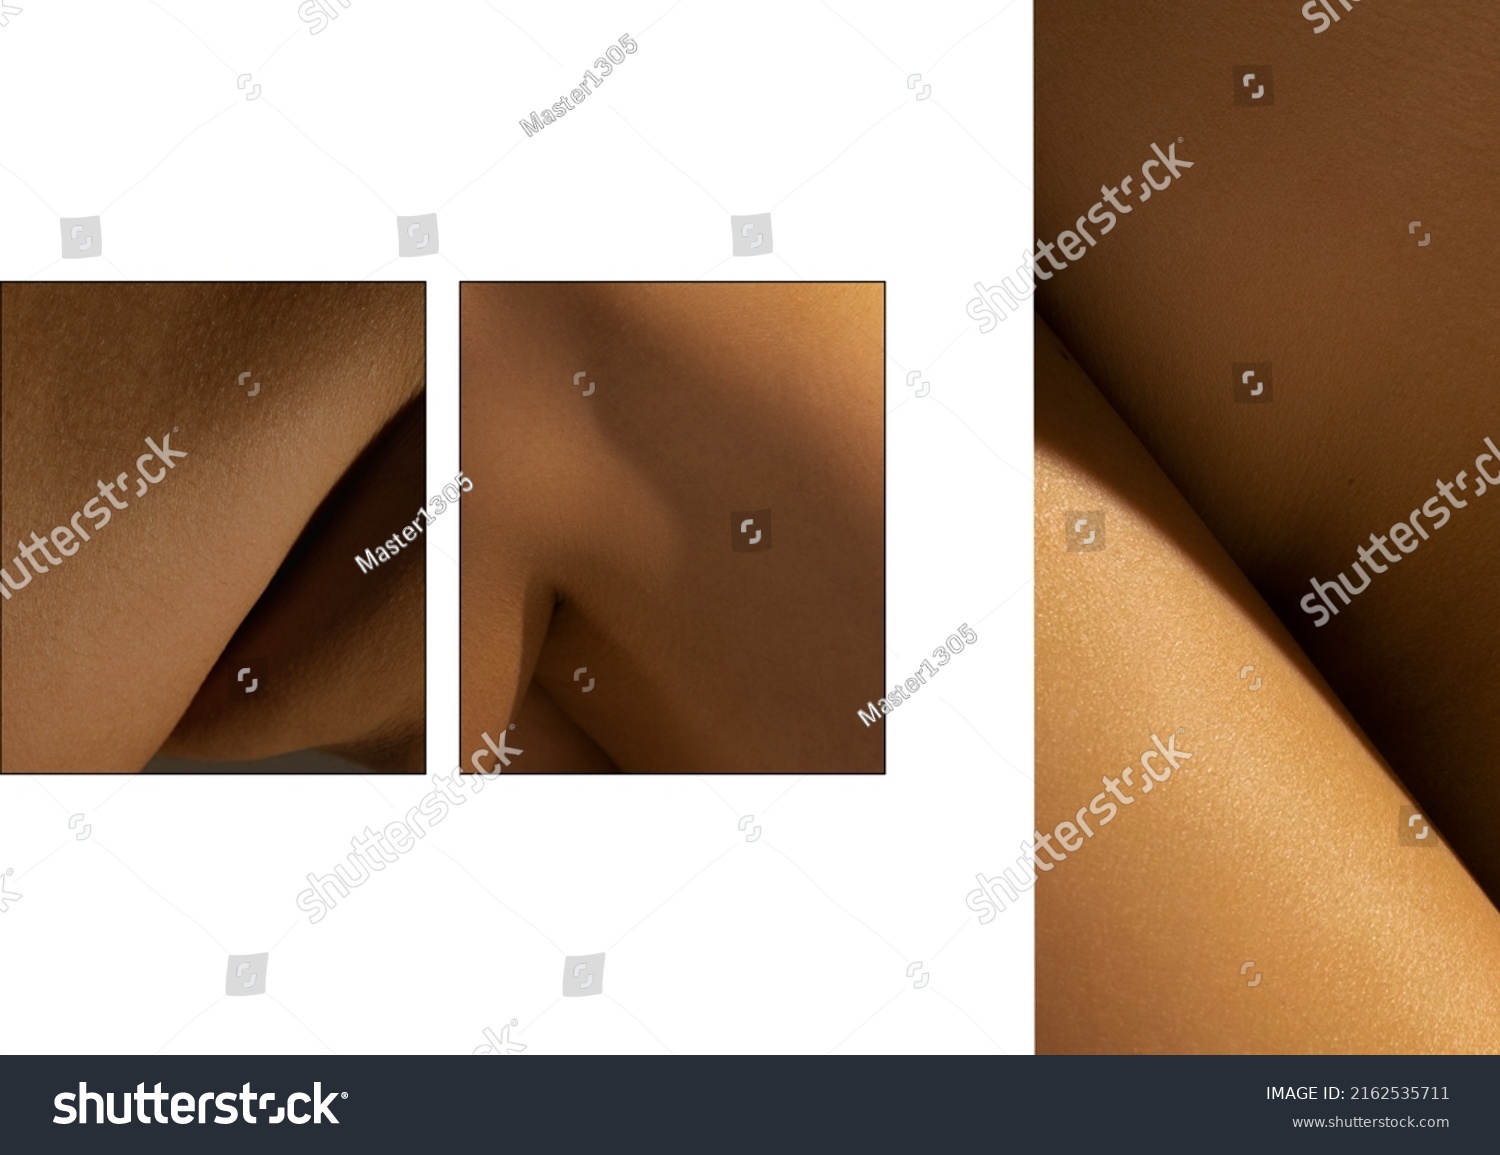 Creative art. Detailed texture of human female skin. Set with closeup images of part of woman's body. Skincare, bodycare, healthcare concept. Photography. Design for abstract poster #2162535711